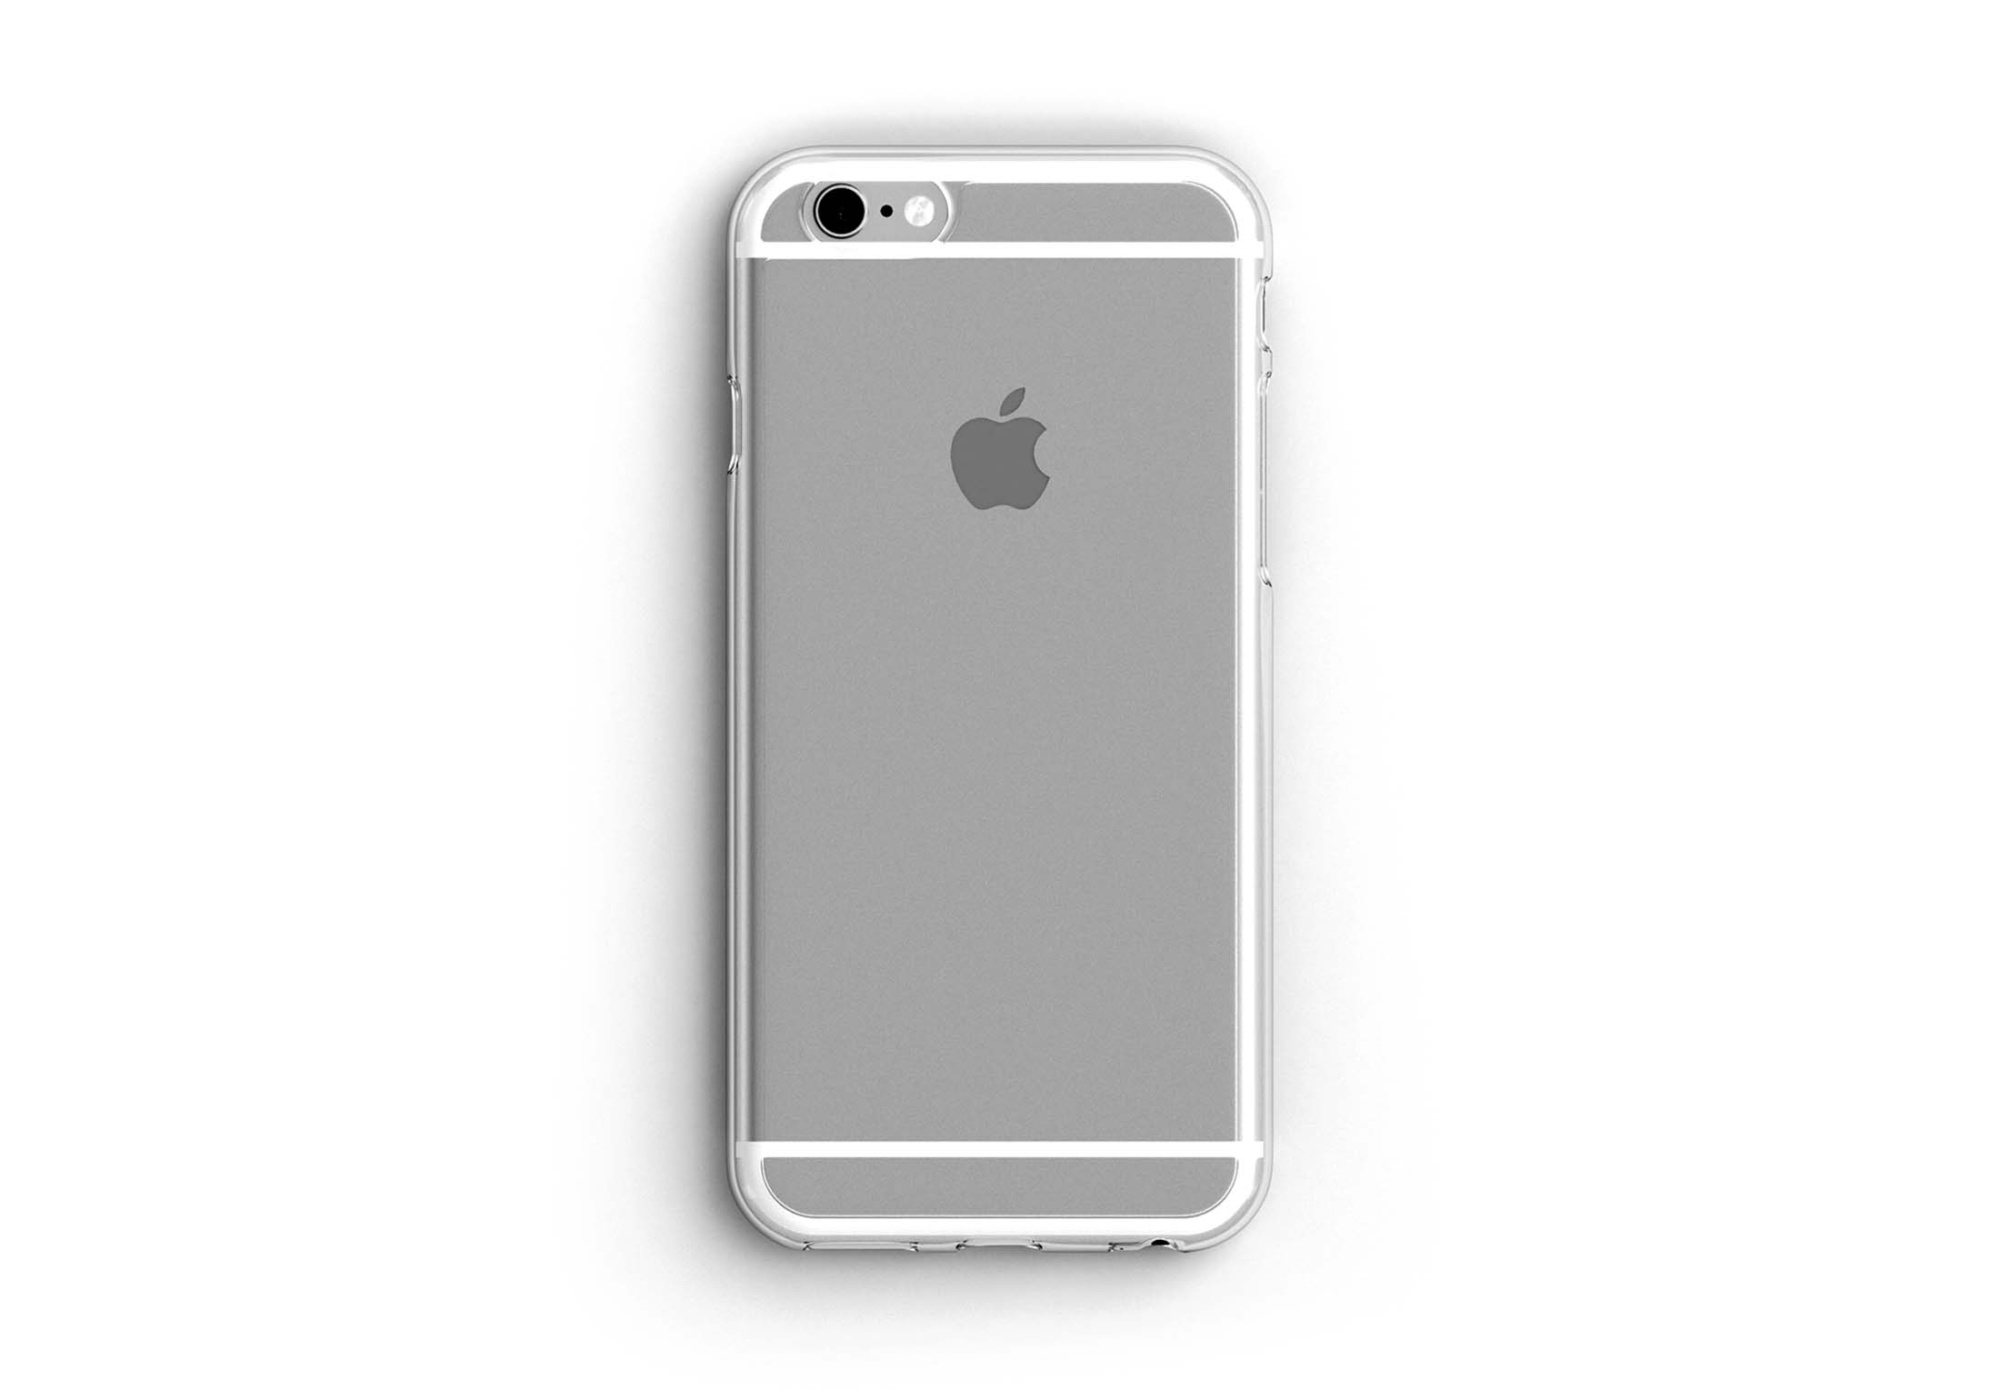 Iphone Back Cover Mockup 2